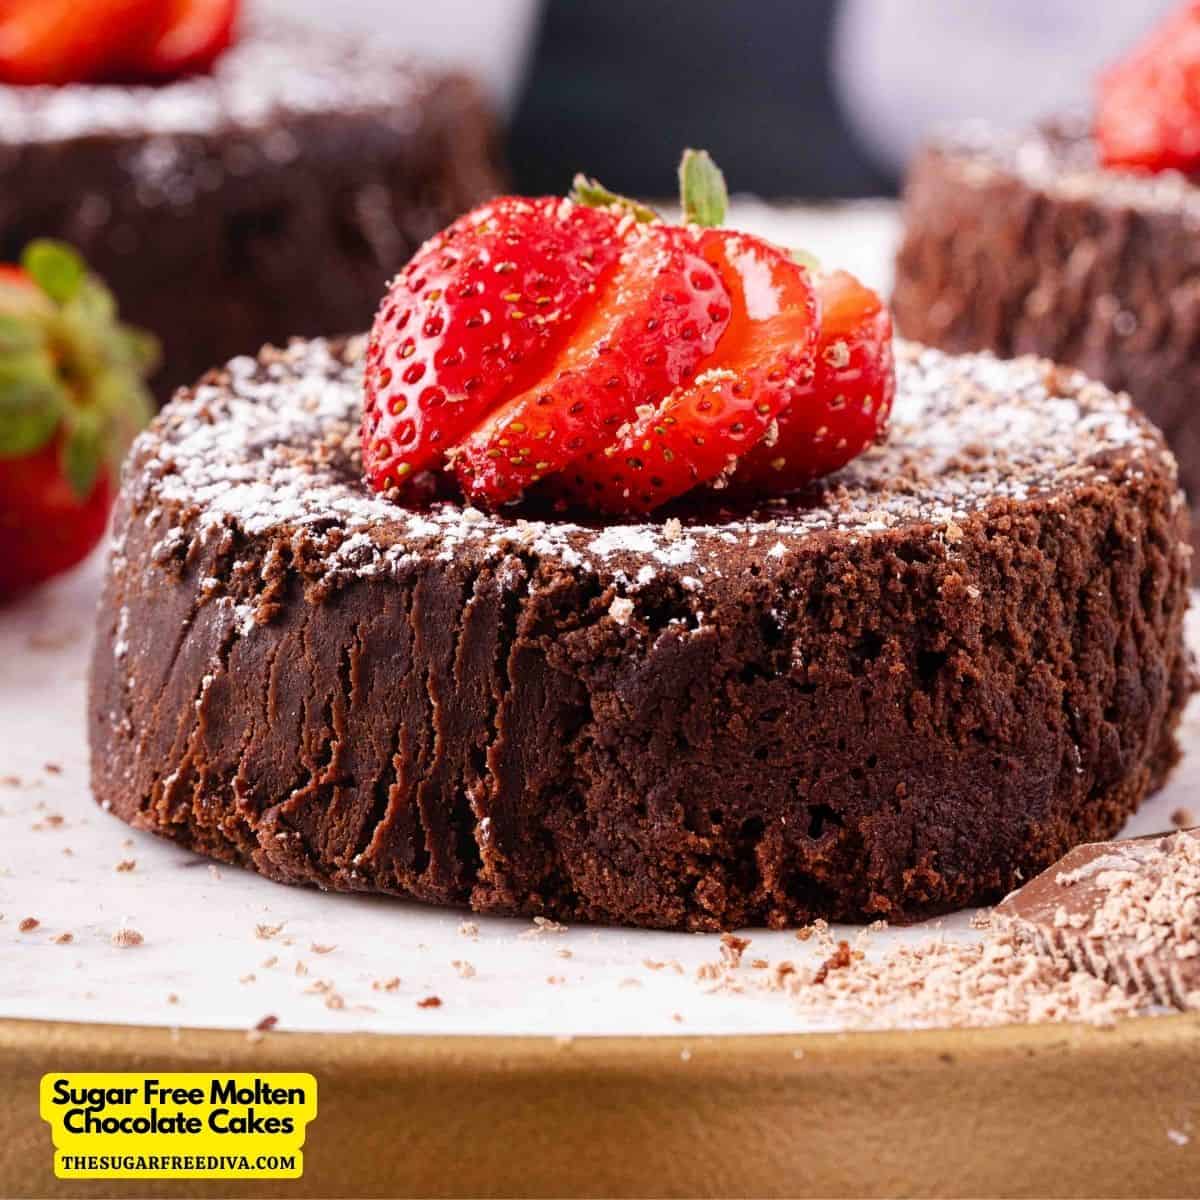 Sugar Free Molten Chocolate Cakes, a simple and decadent dessert recipe  made with unsweetened cocoa and no added sugar.